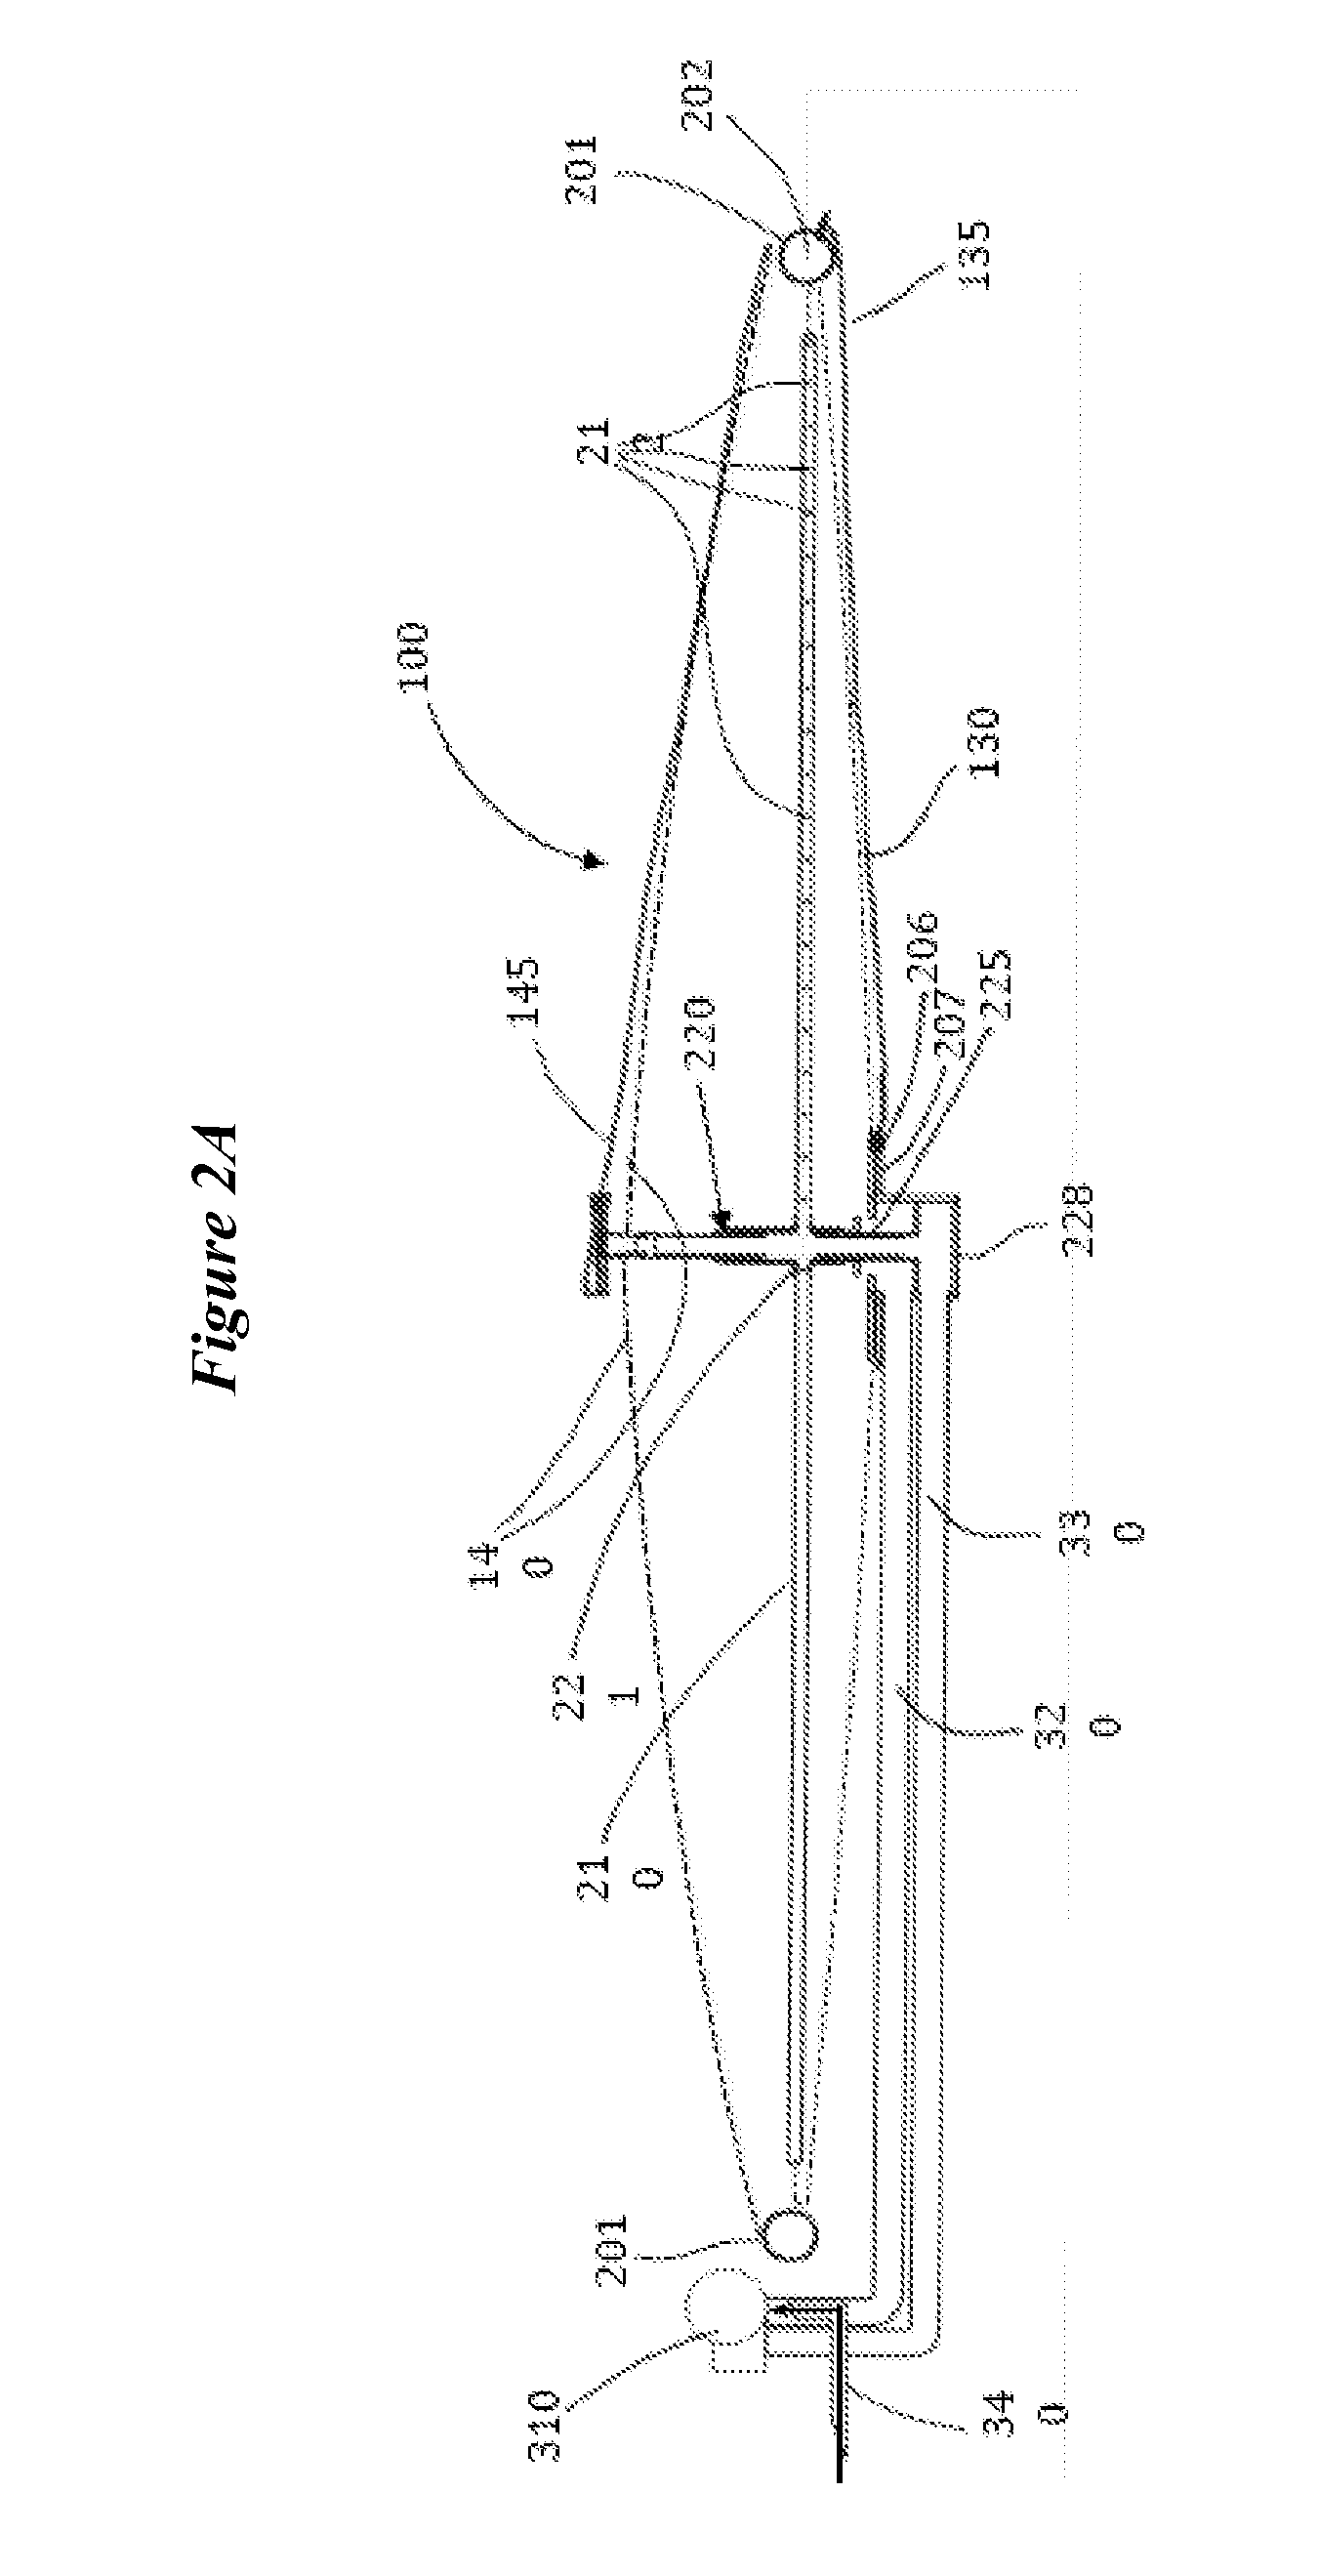 Outdoor cultivator for photosynthetic microorganisms